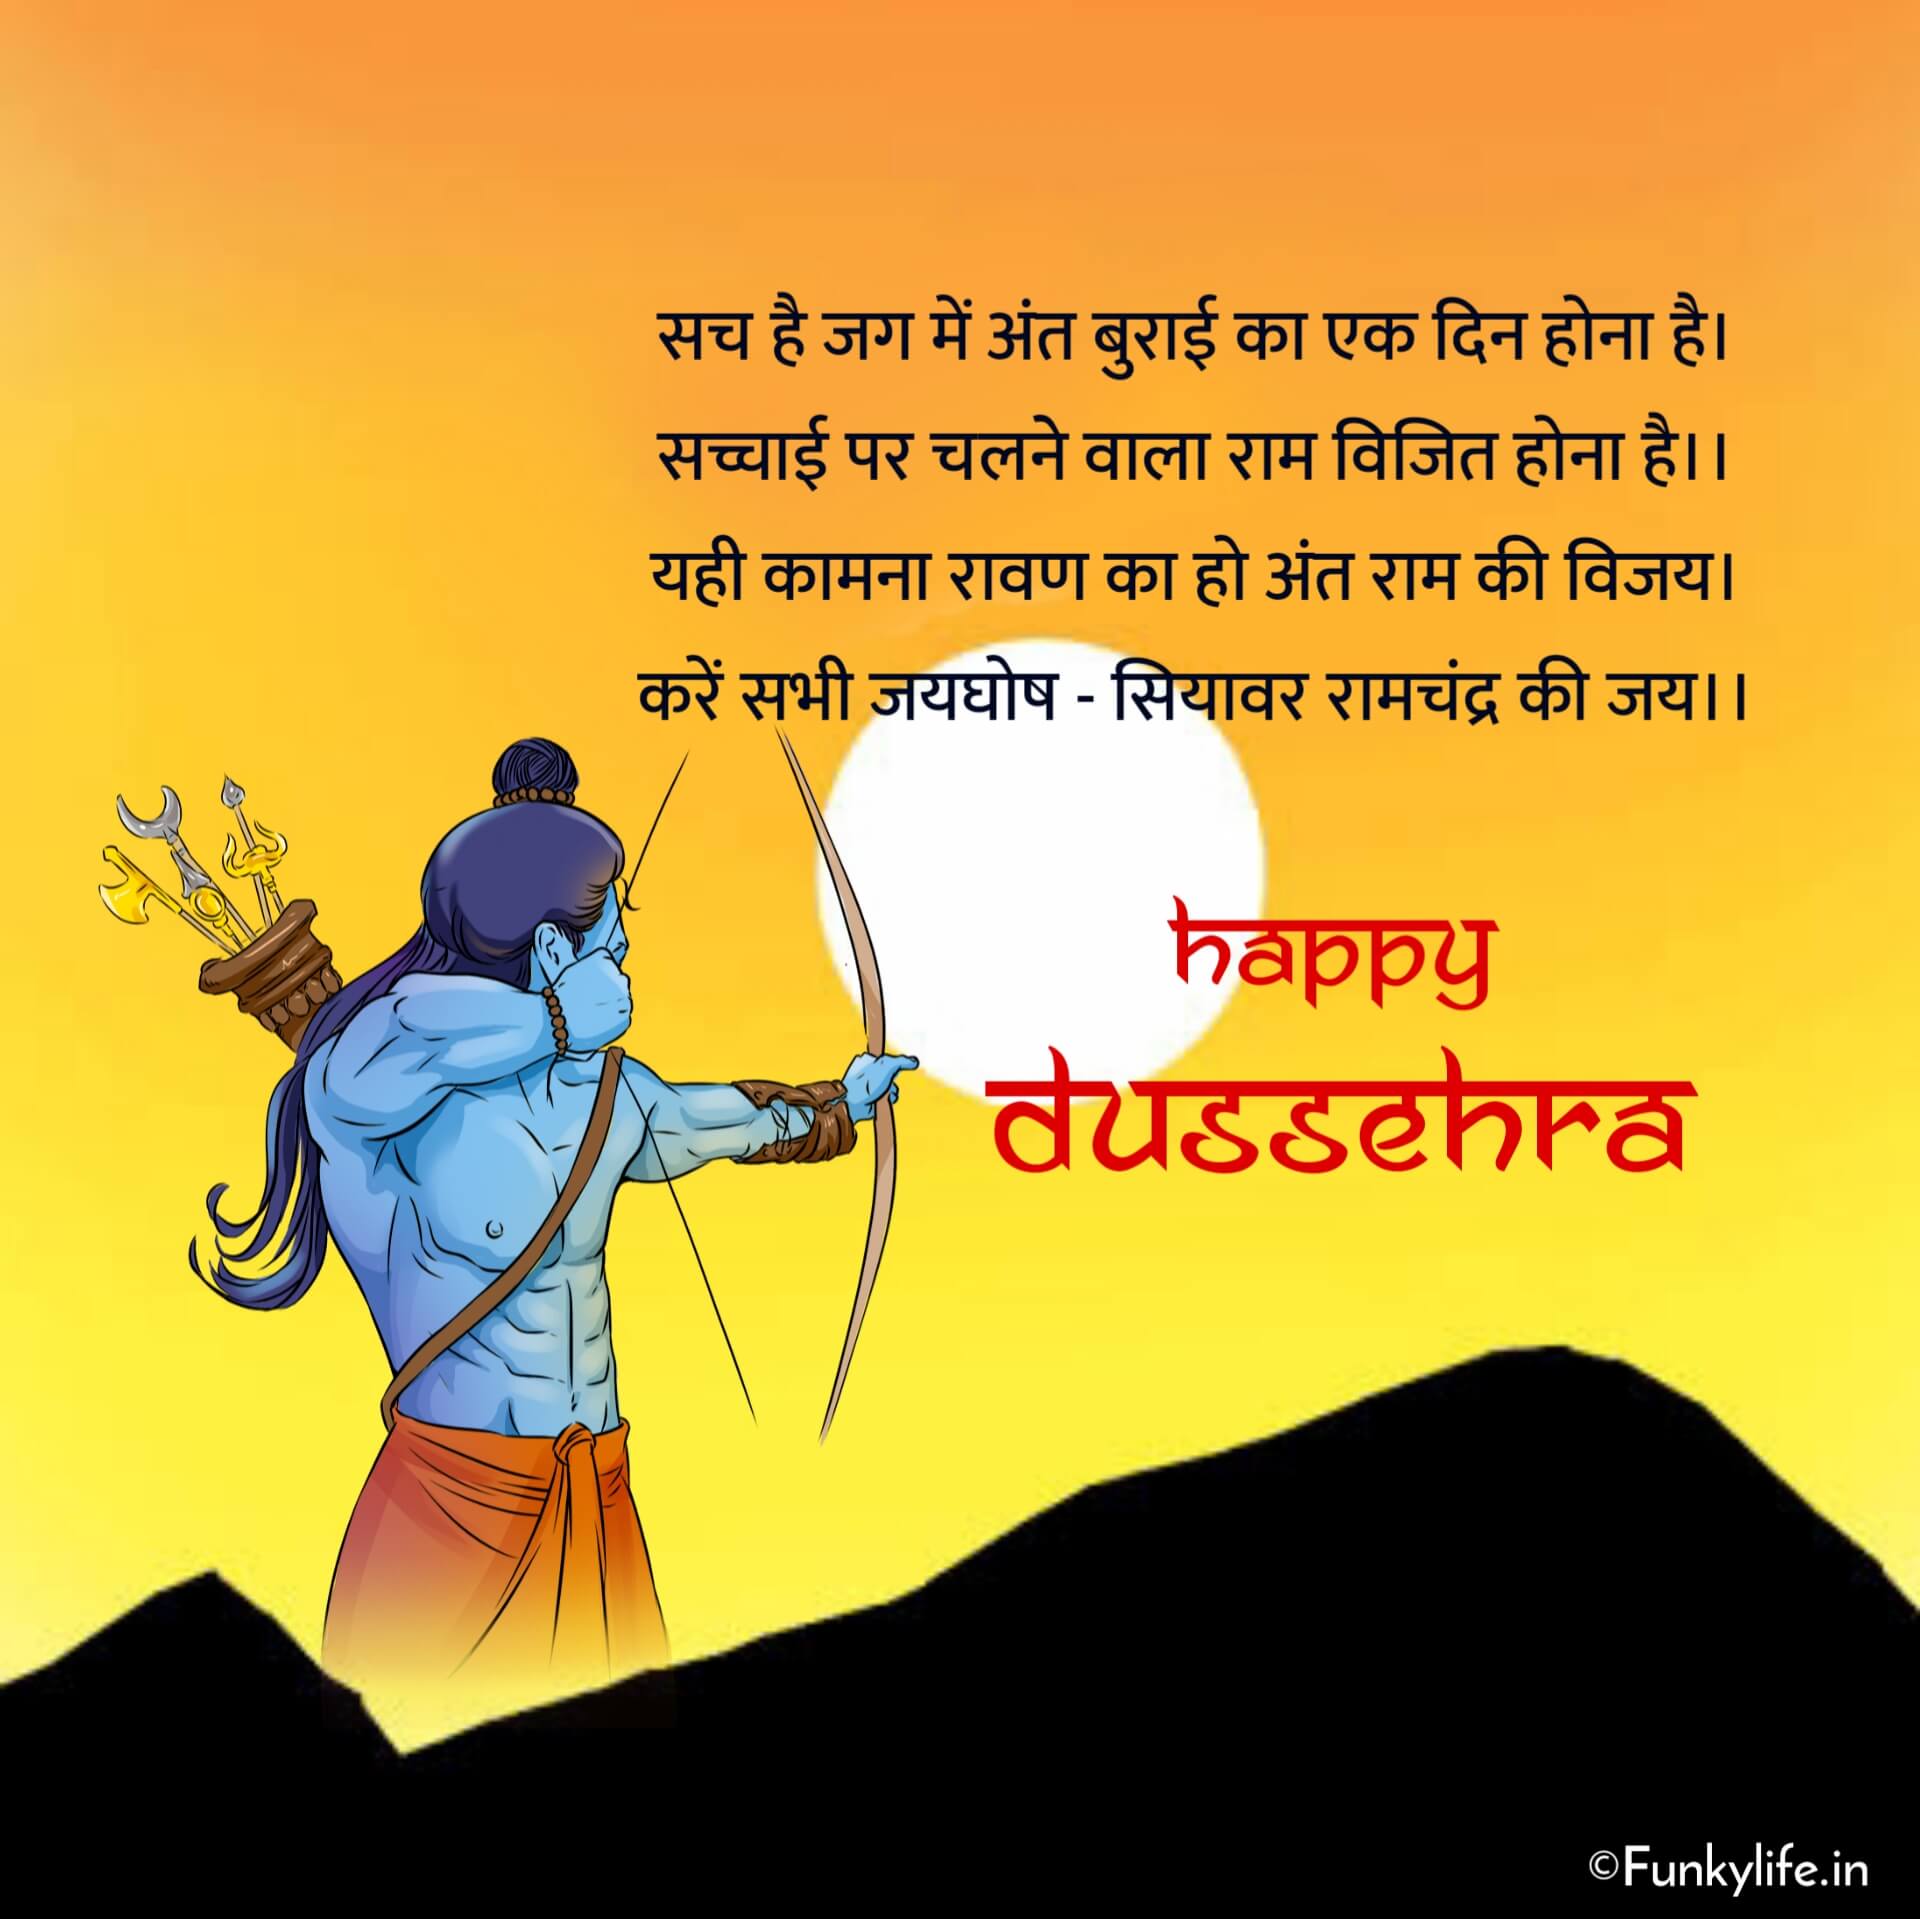 Happy Dussehra Wishes in Hindi Images